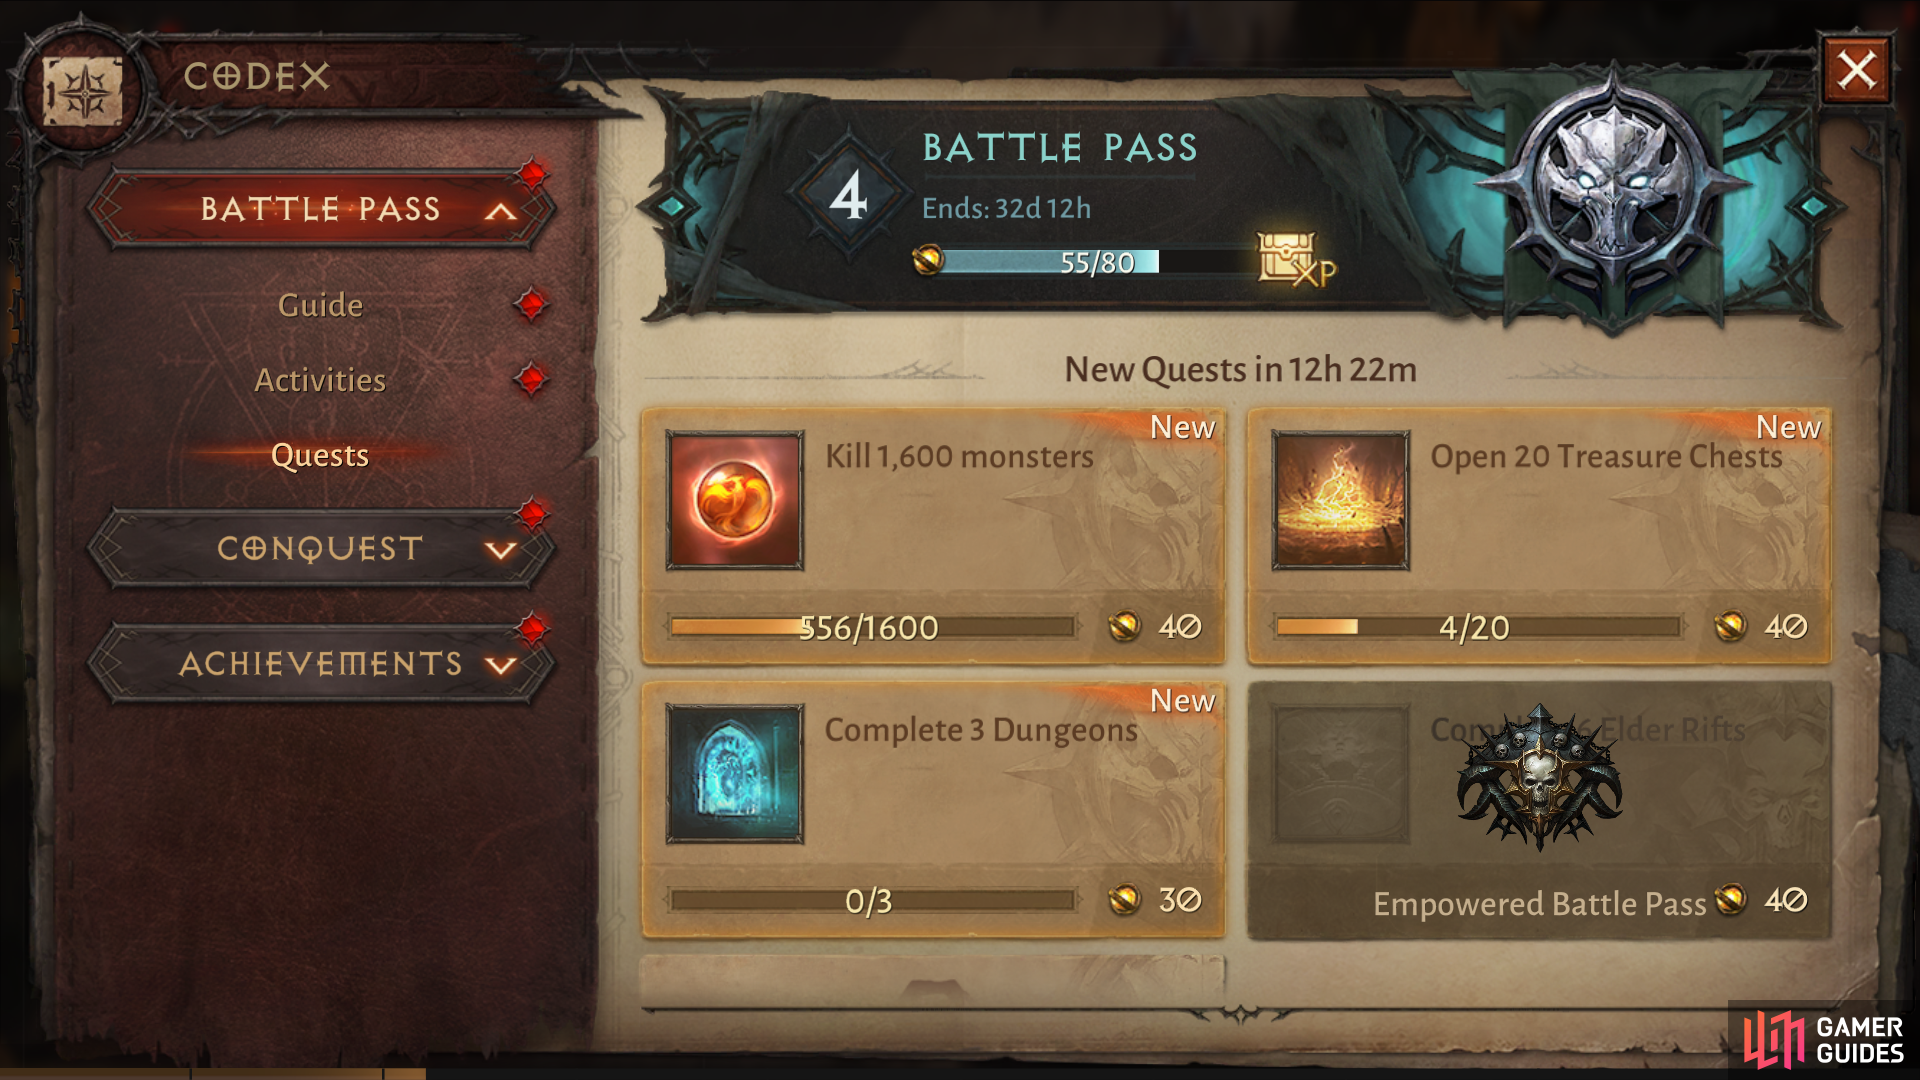 Ended day 1 of Diablo Immortal at level 38, with 3 legendary items and 19.5  on the Battle Pass. What a great game! I'm glad to have a launch day  account. How